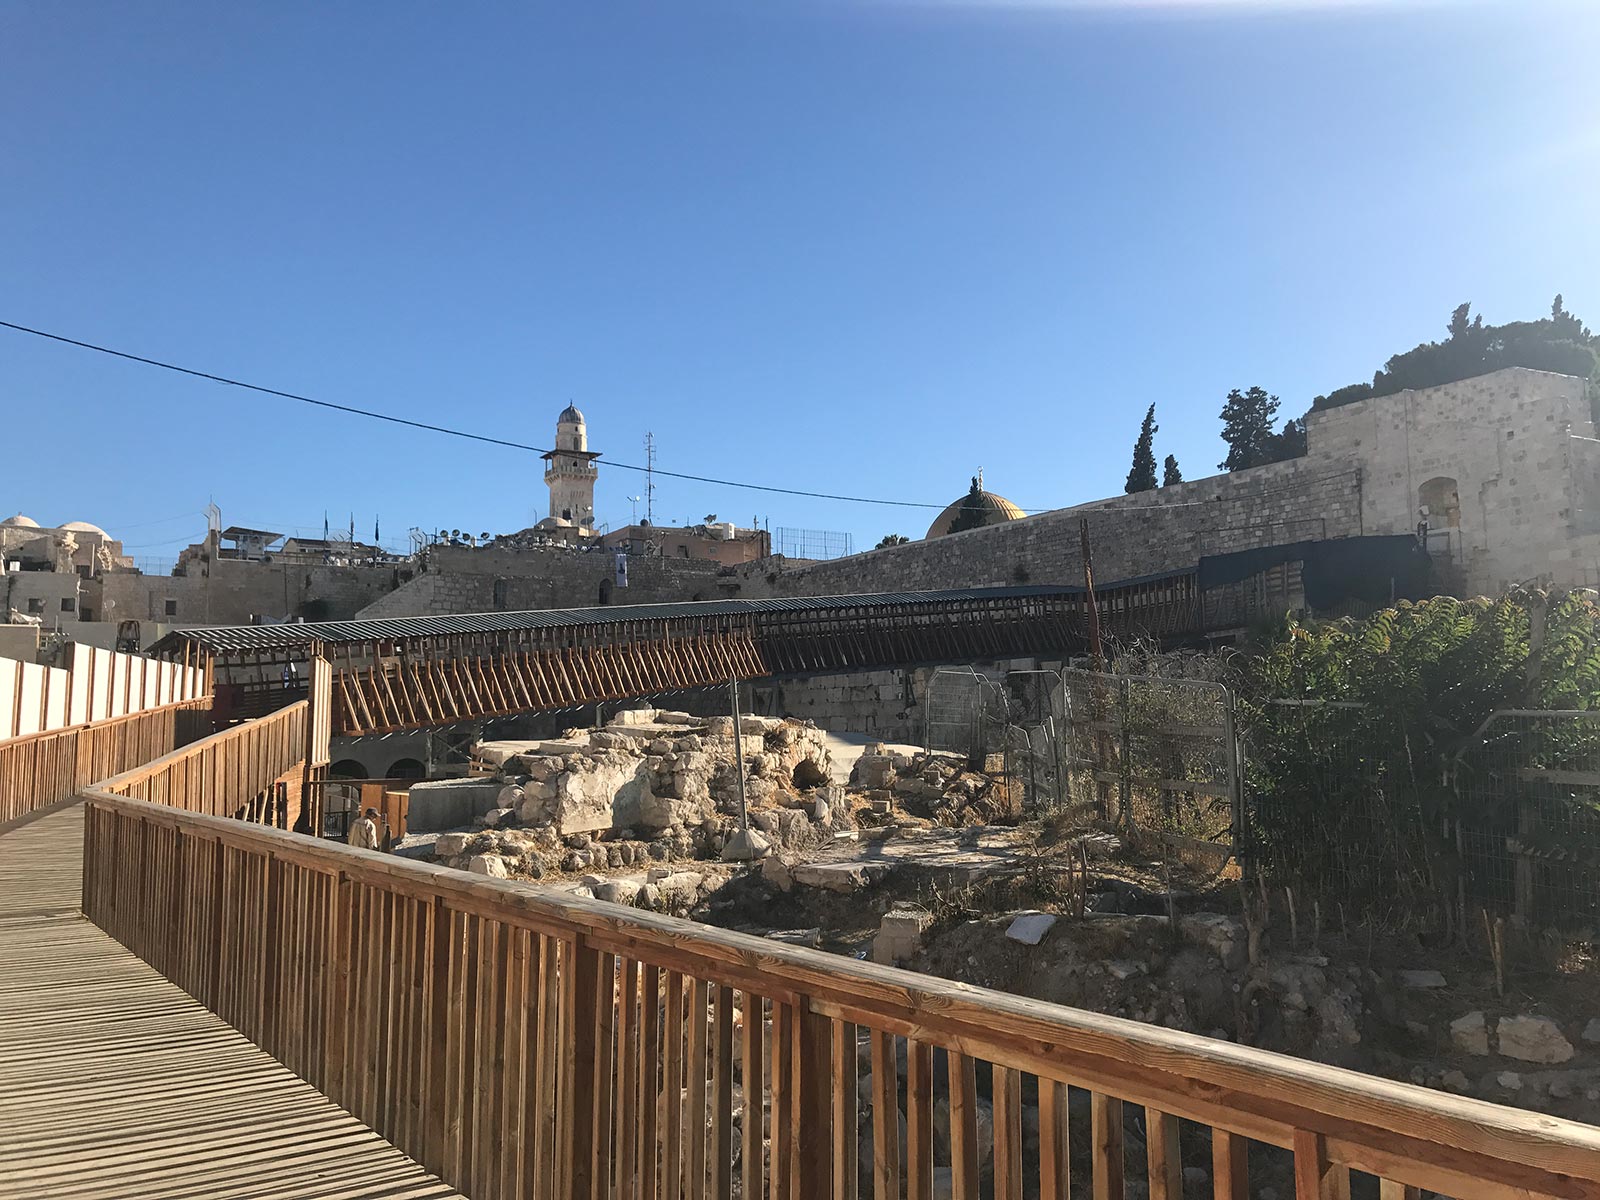 Path to Temple Mount and Dome of the Rock in Jerusalem, Israel. My time in Jerusalem, a special city divided